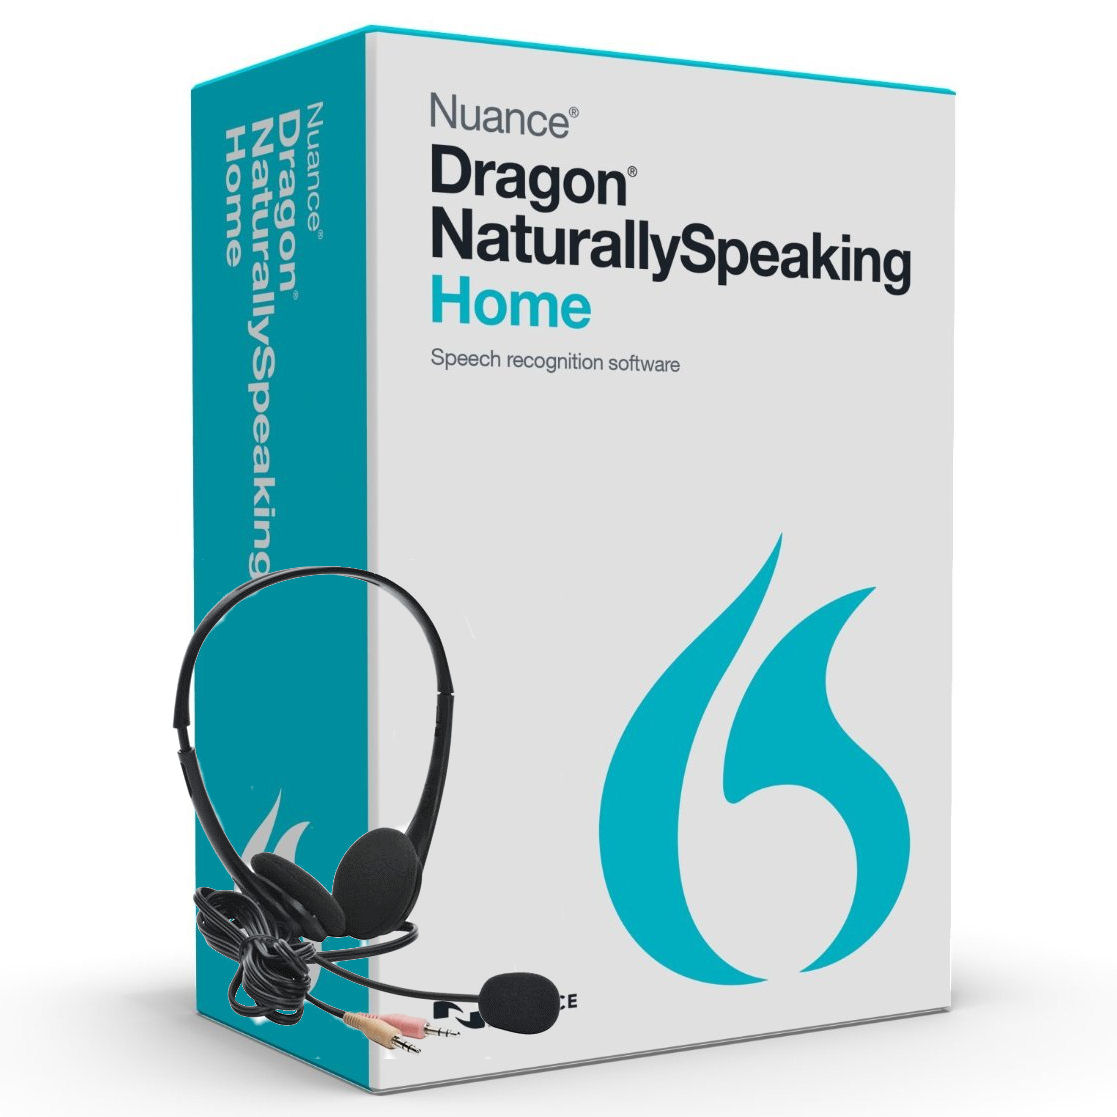 dragon speech recognition software free download